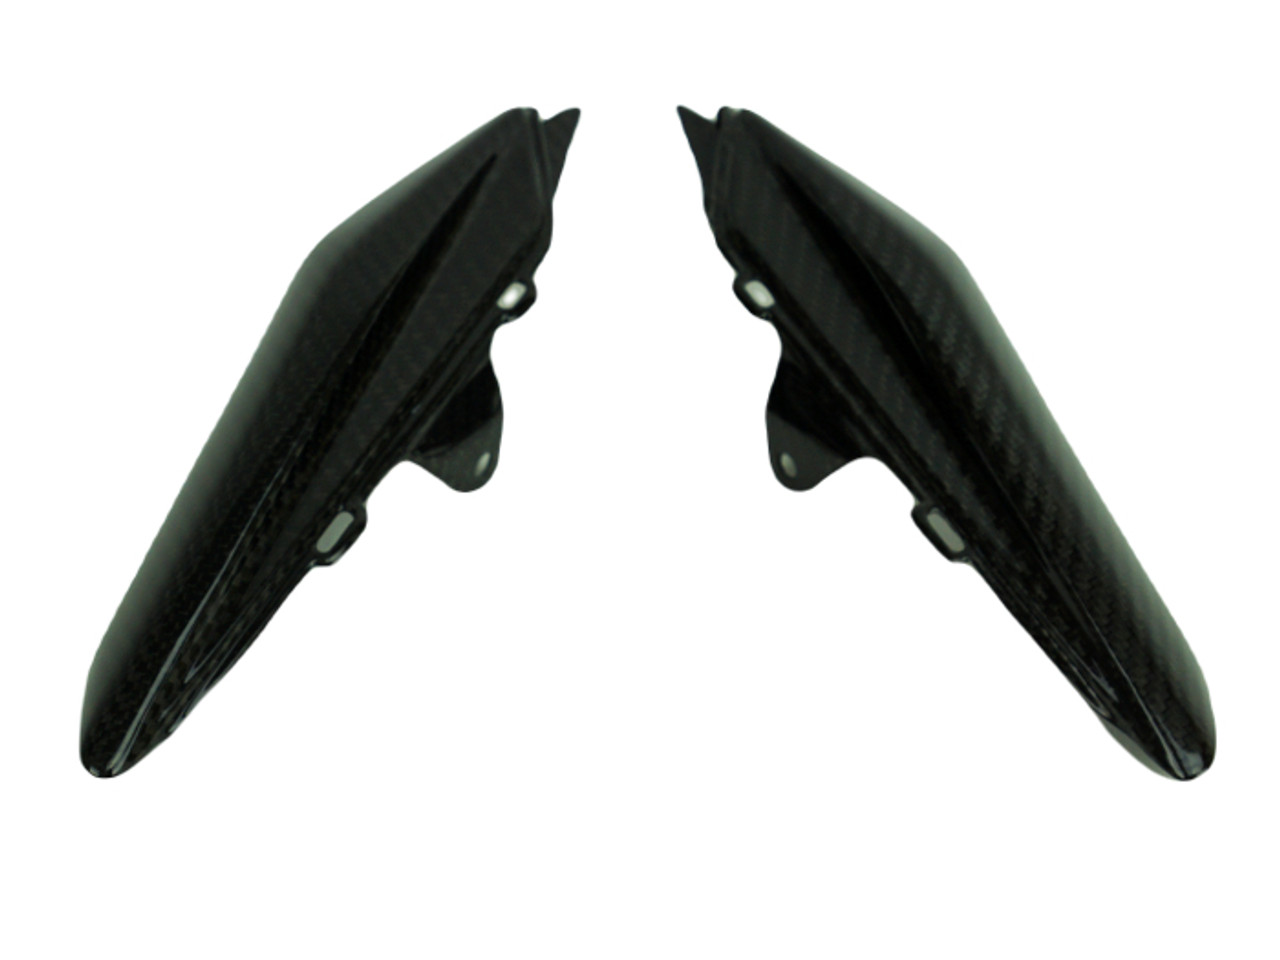 Small Tail Covers in 100% Carbon Fiber for Kawasaki ZX10R 2011-2015